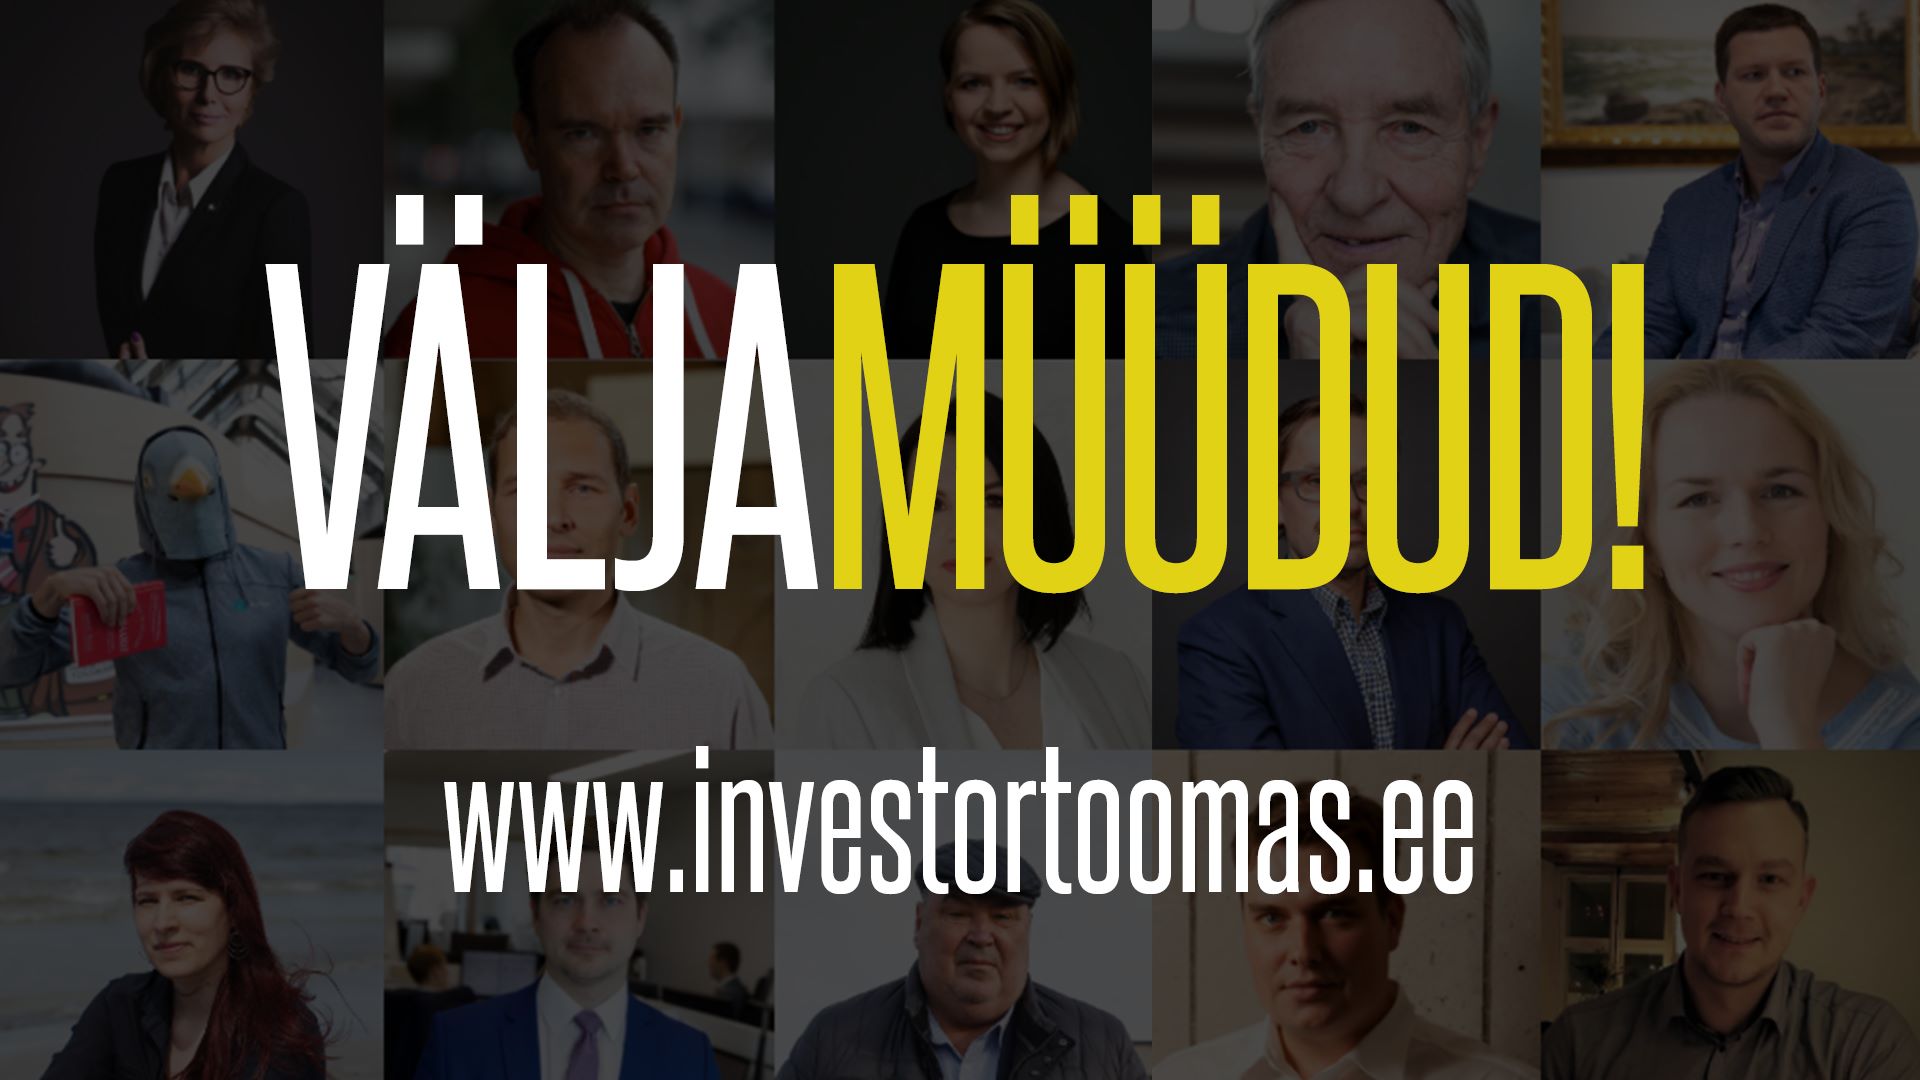 12643INVESTOR TOOMAS CONFERENCE 2020